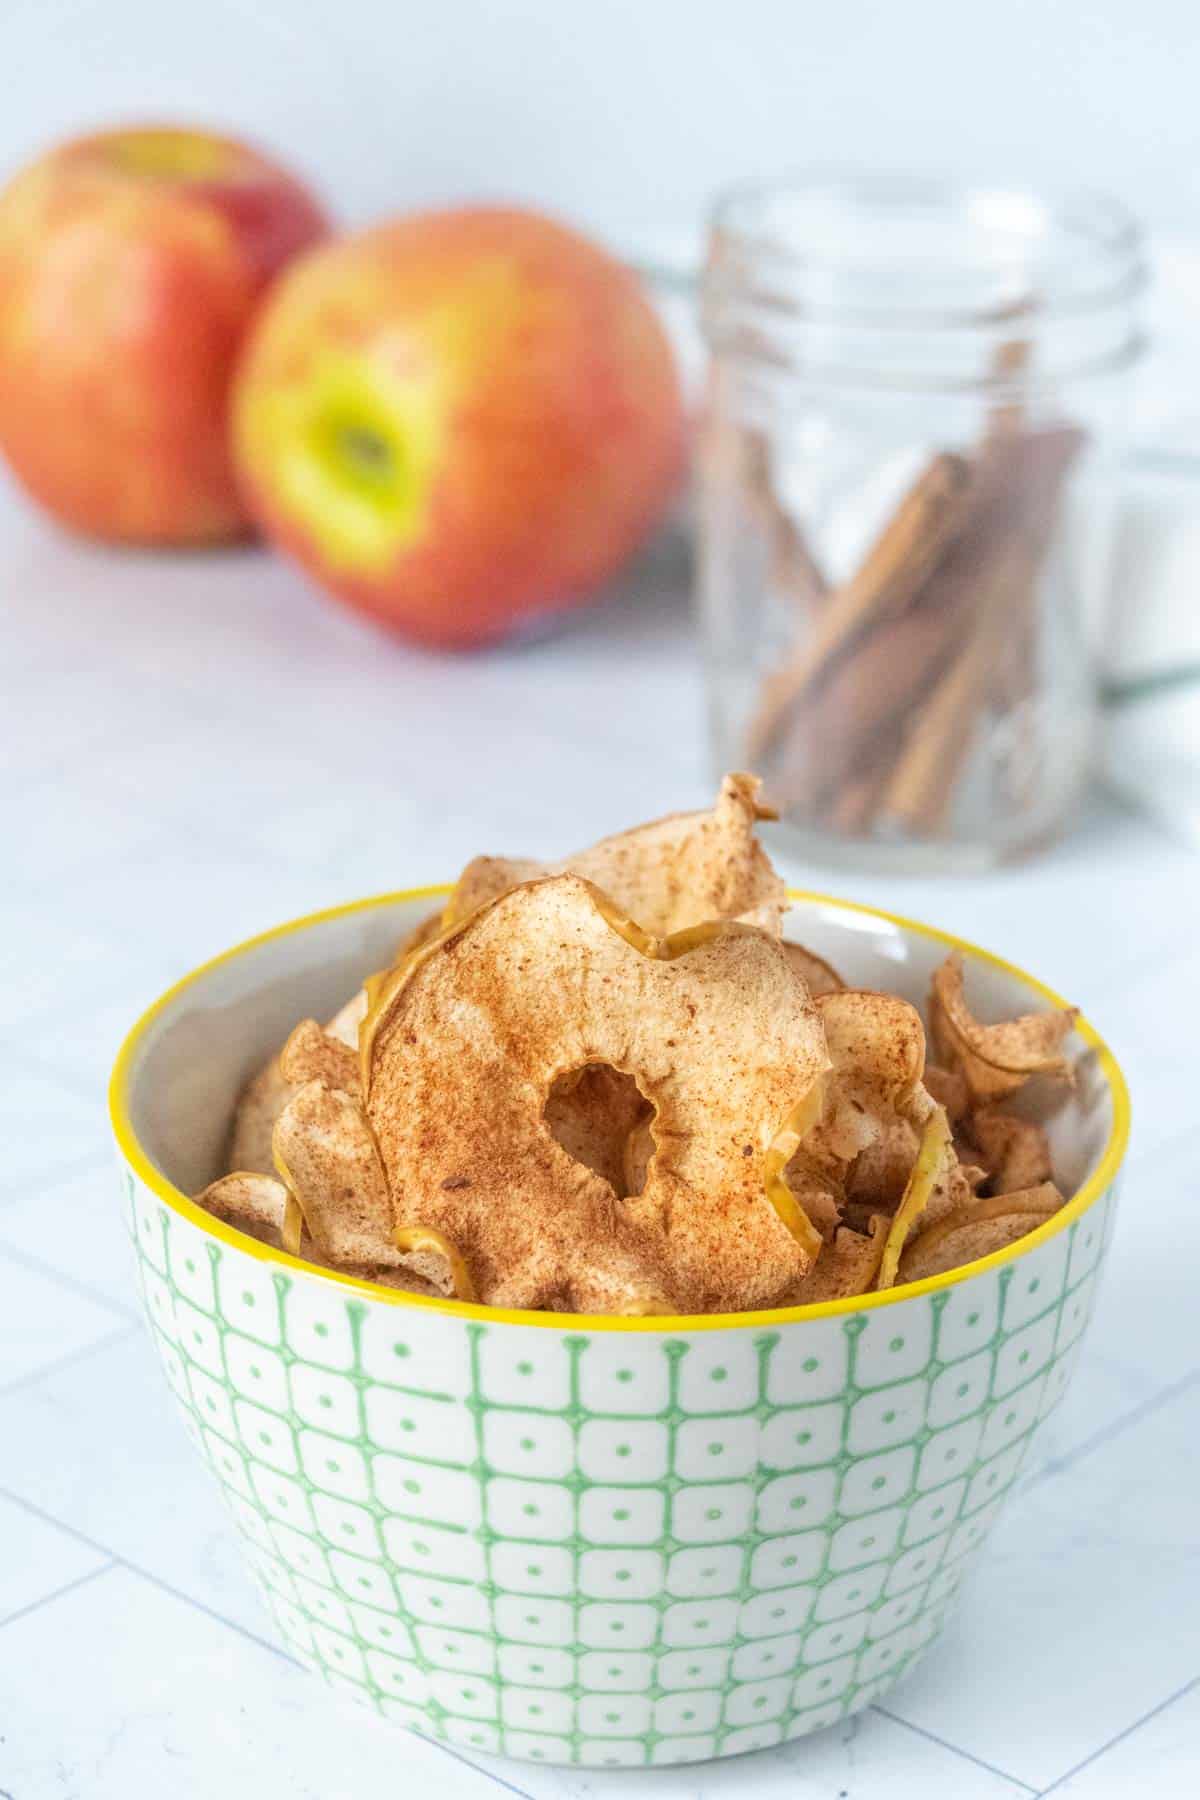 Apple chips in a bowl with cinnamon sticks.